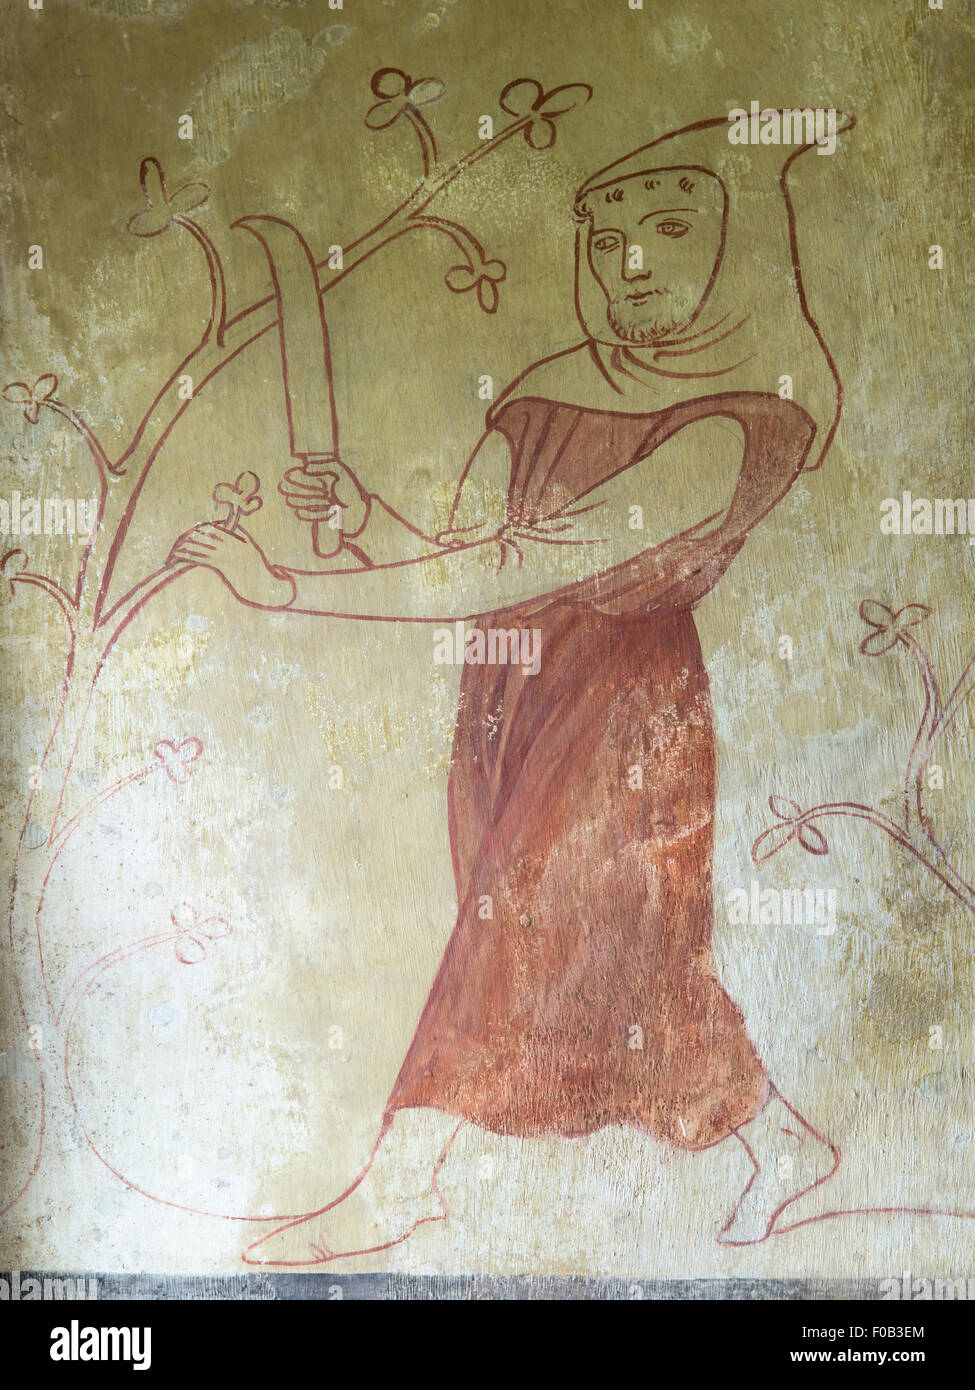 An agricultural labourer pruning a tree, as depicted in a medieval wall painting in Easby Church, Richmond, North Yorkshire, UK Stock Photo